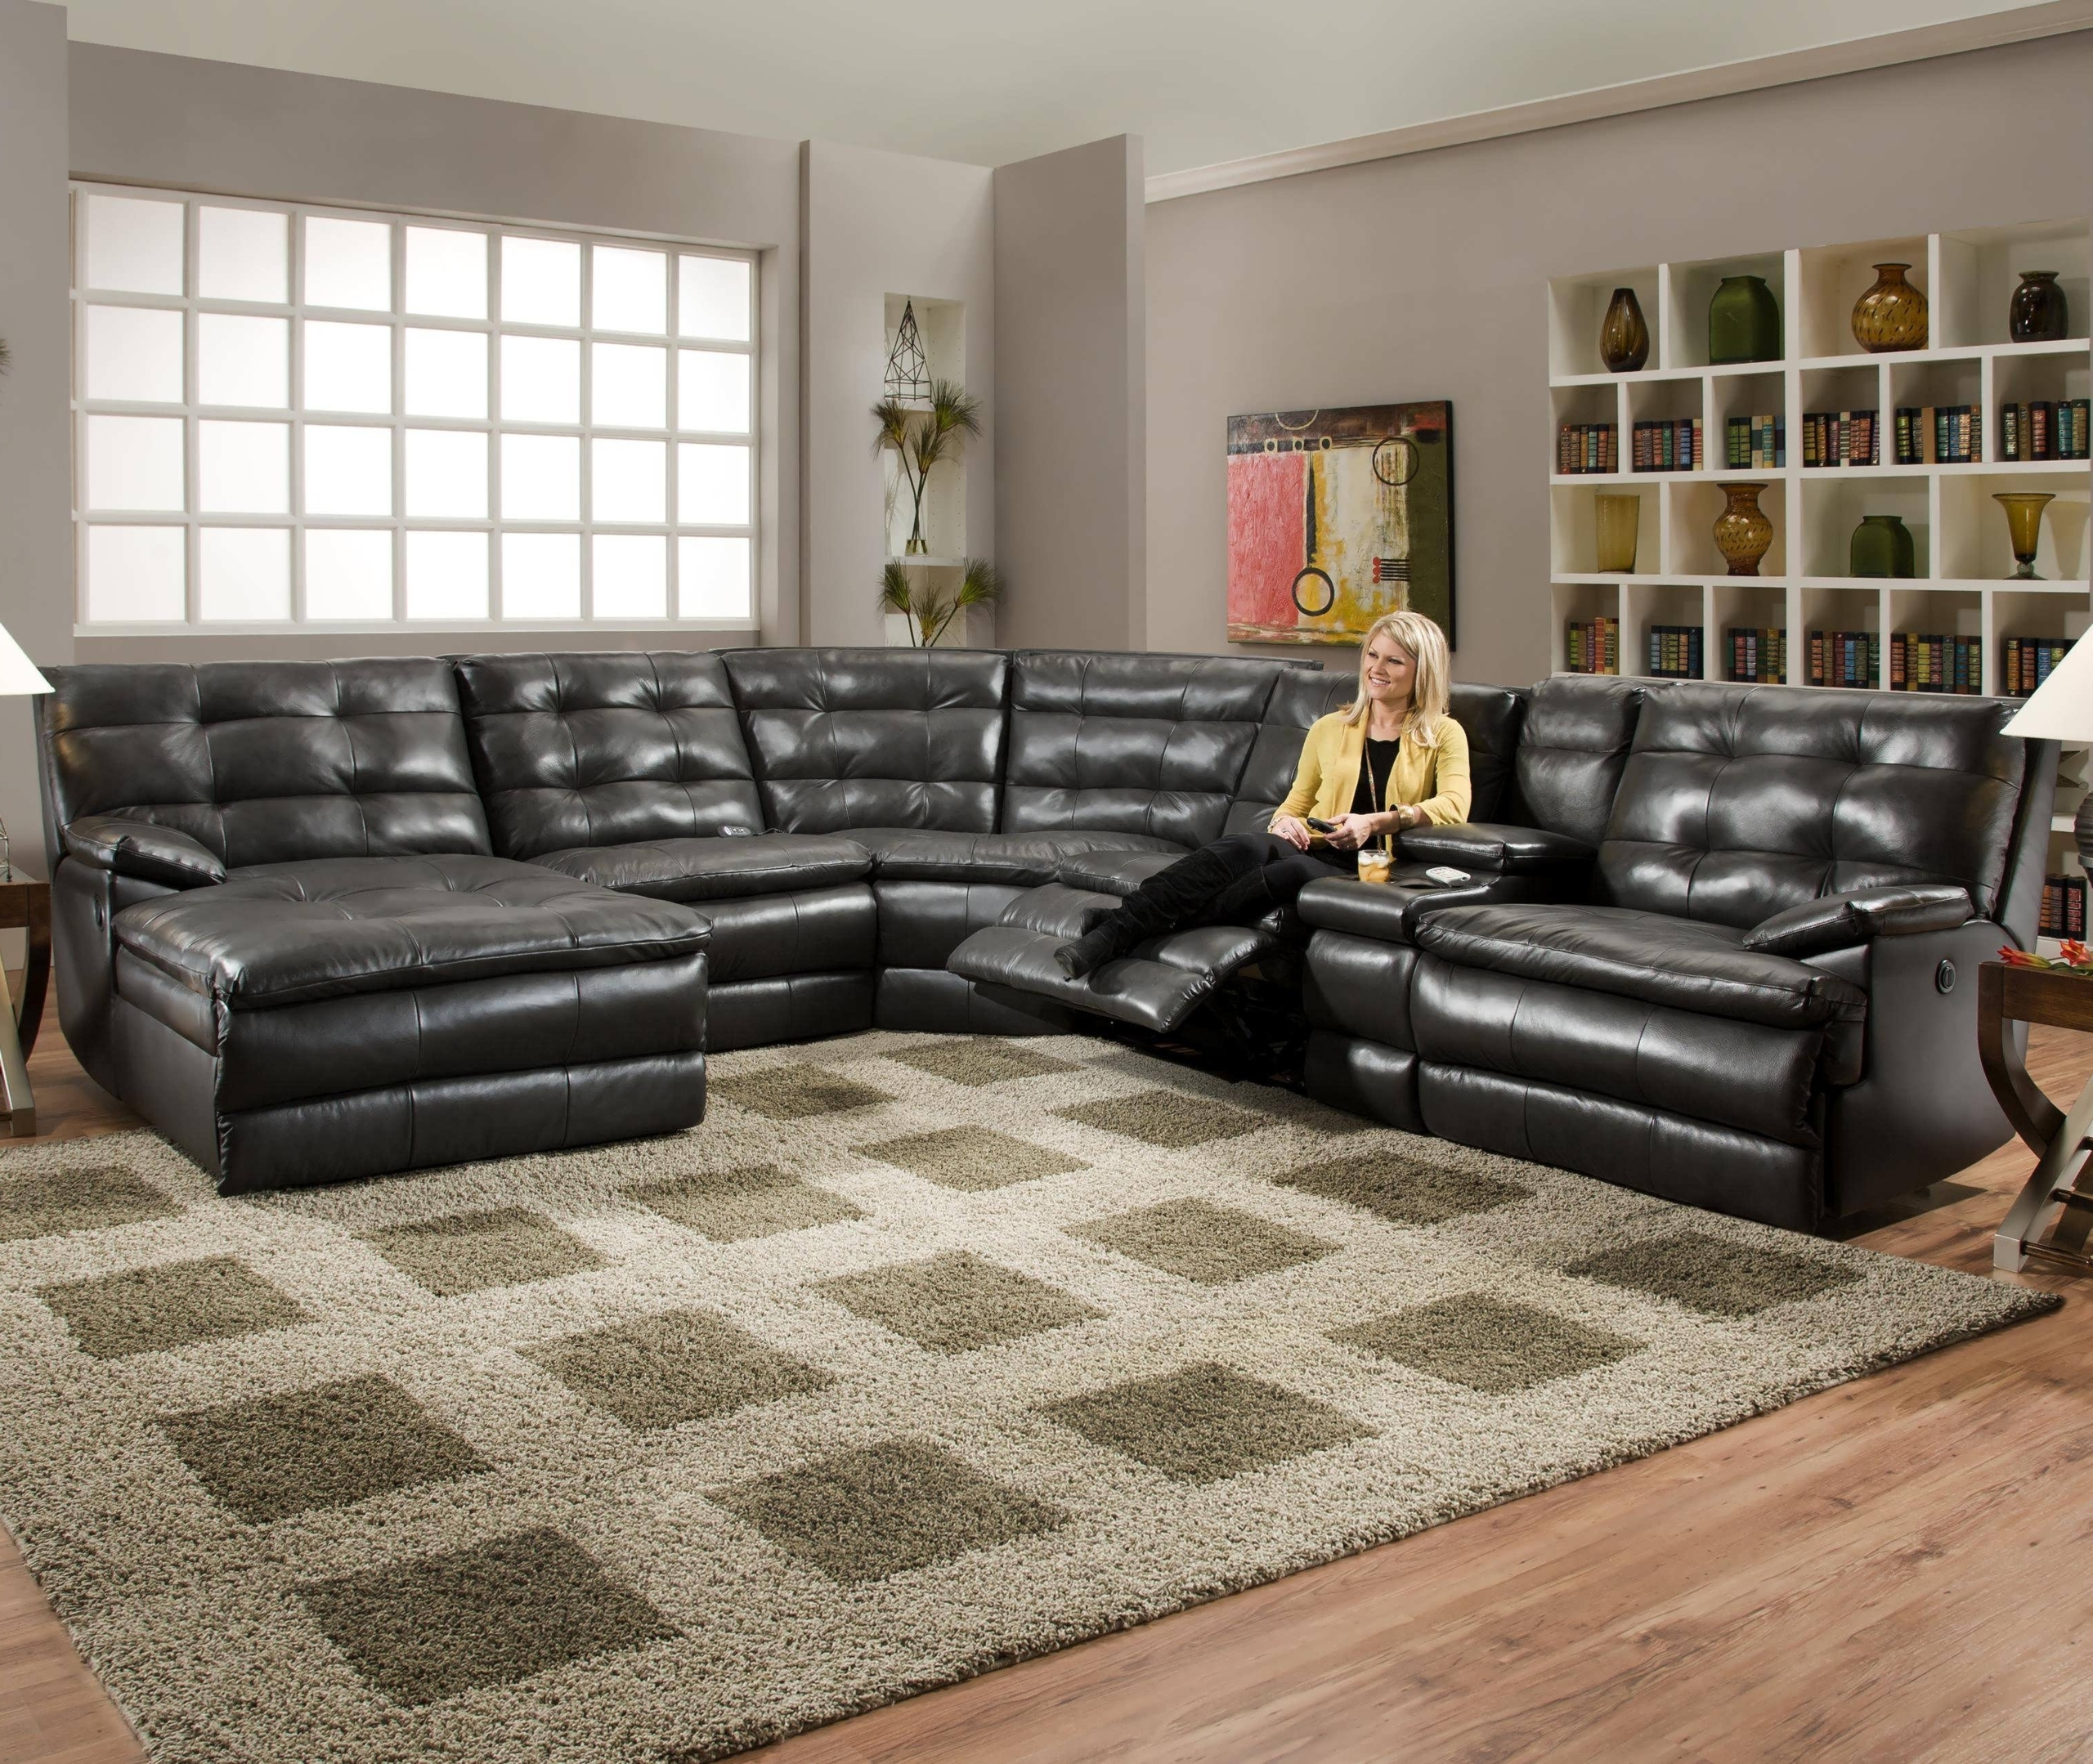 Extra Large Sectional Sofa Visualhunt, Big Leather Sectional